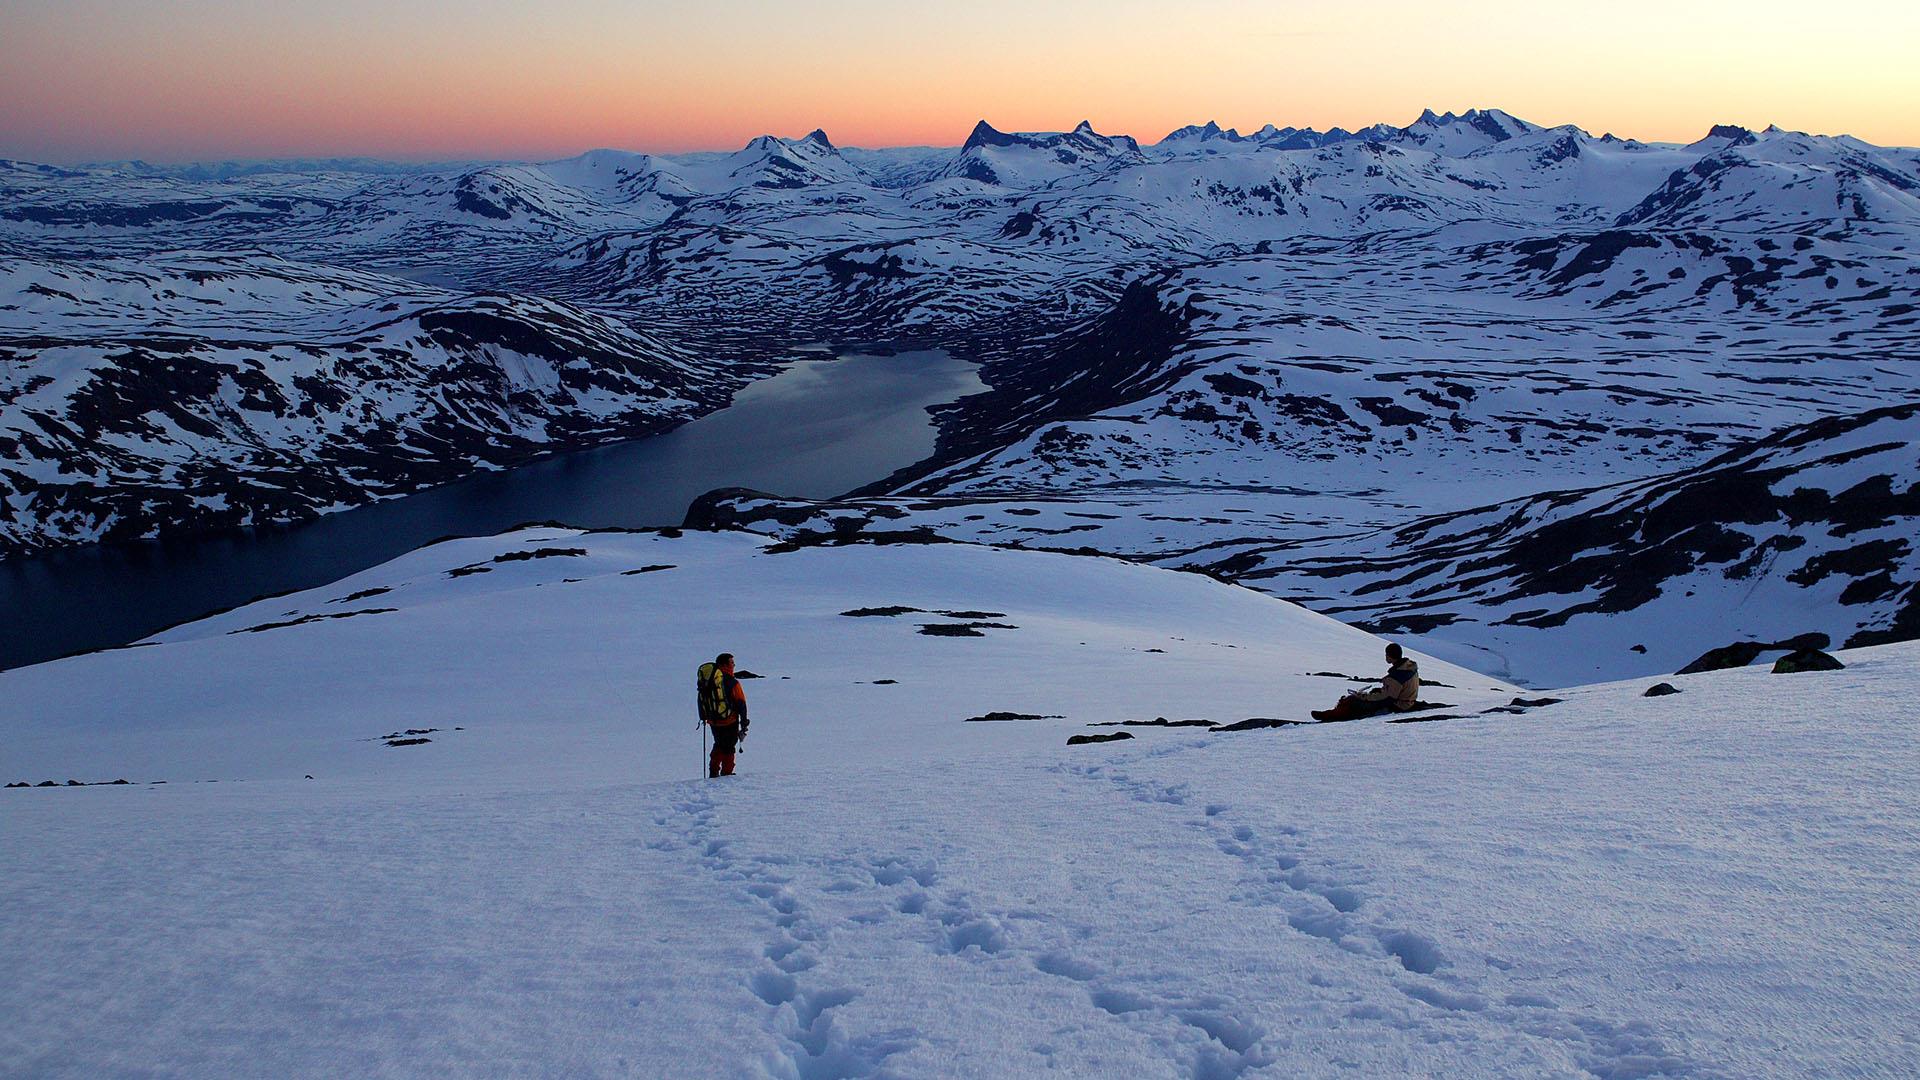 Two small persons in a magnificent mountain landscape with a lake and many high, pointed peaks before sunrise with a red-coloured horizon early in the season with much remaining snow.